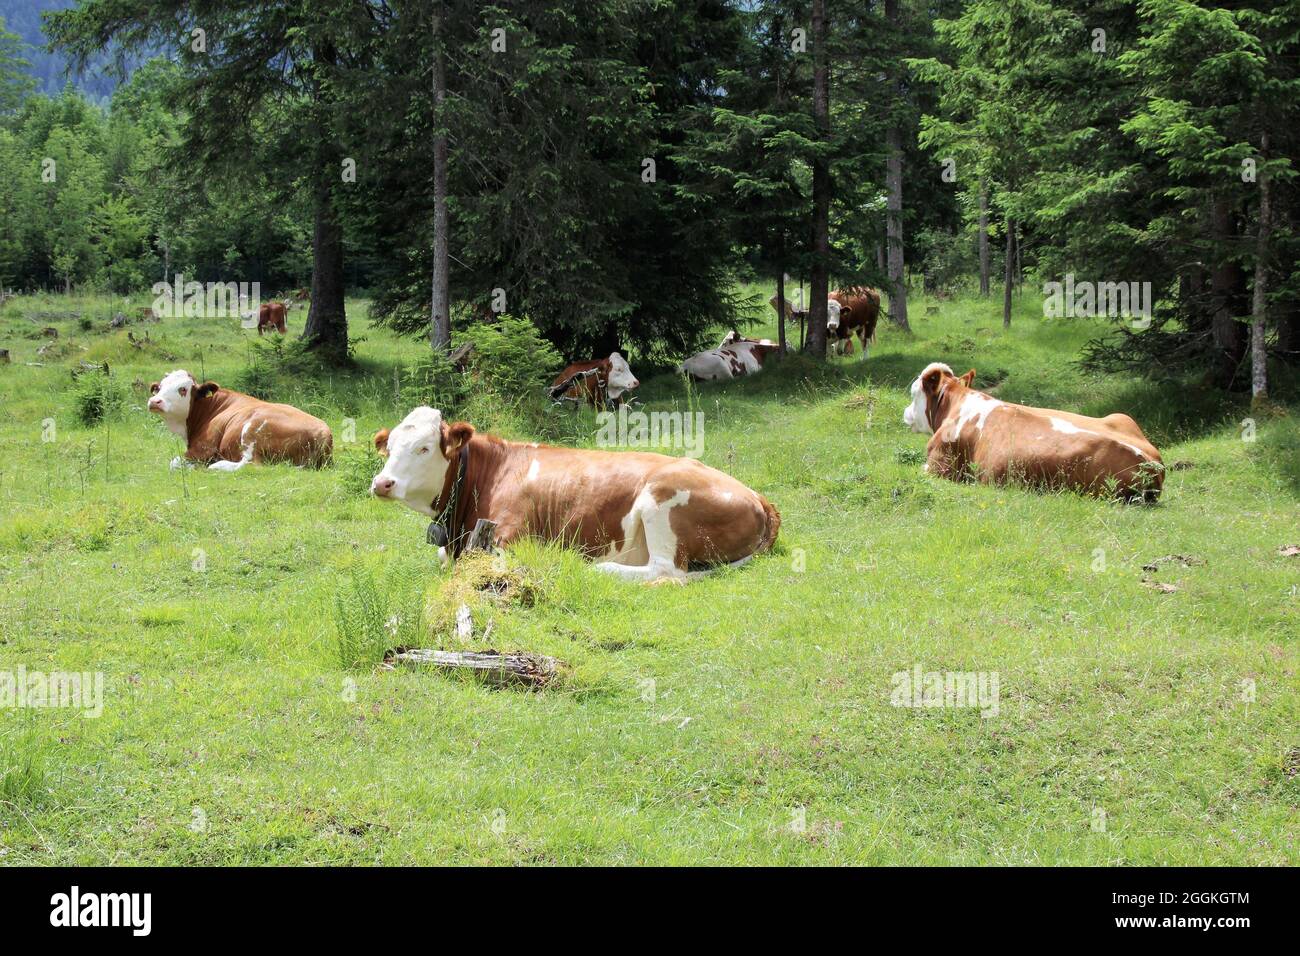 Cow, suckler cow, young cow breed Simmental cattle on pasture, Seins Alm, Isar Valley, Mittenwald, Upper Bavaria, Bavaria, Germany Stock Photo